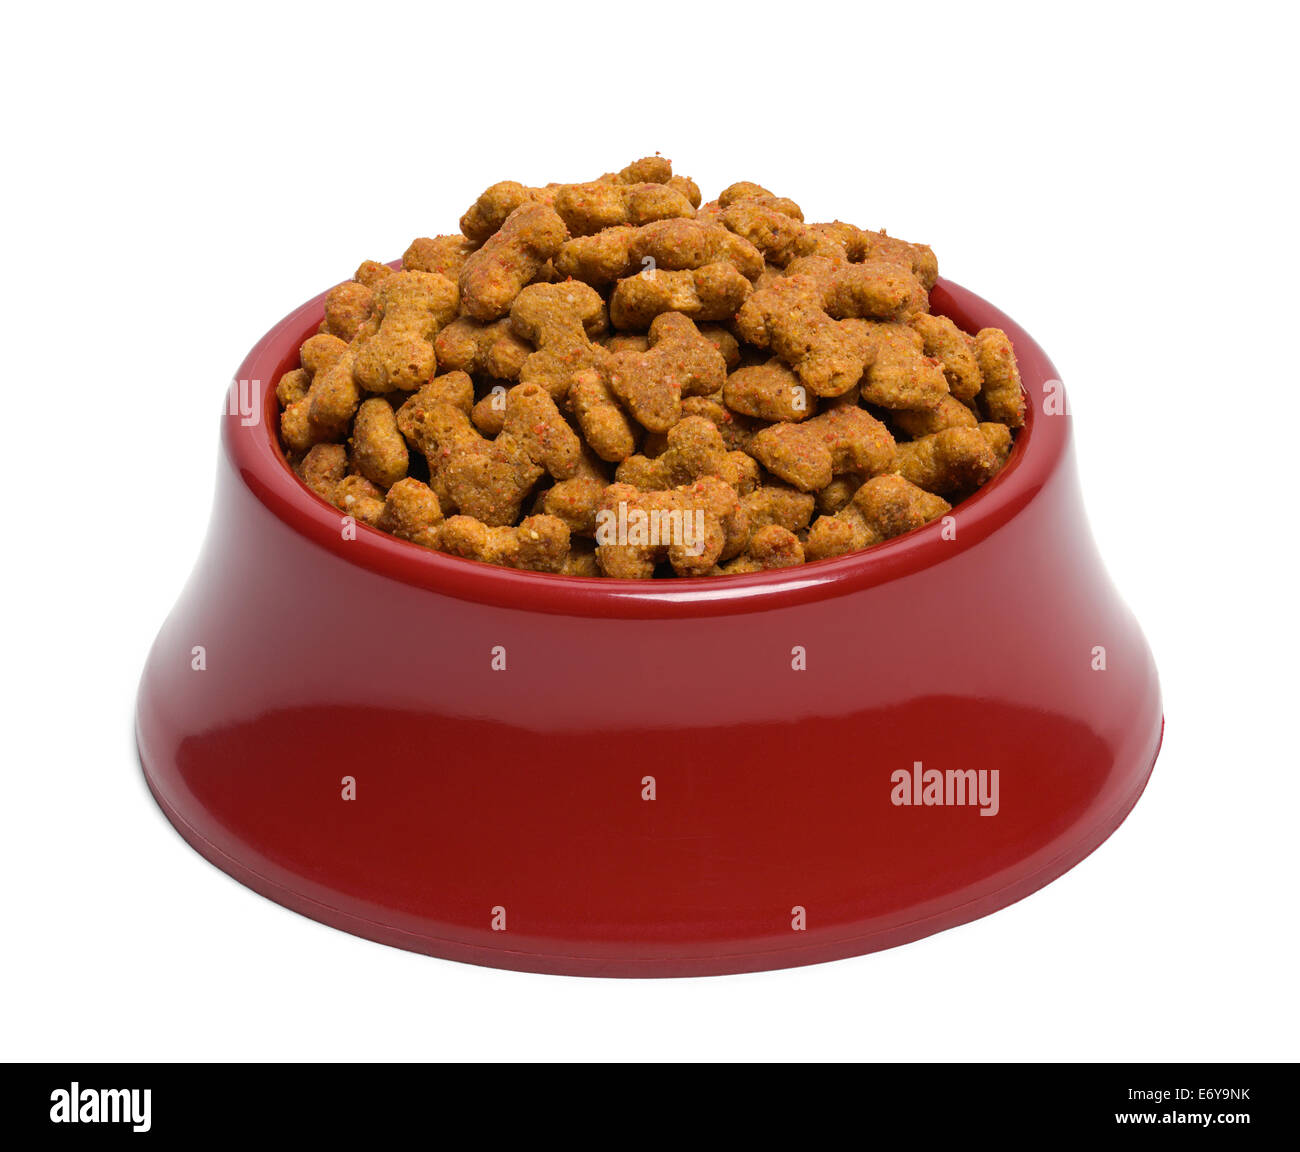 Red Bowl of Dog Food Isolated on White Background. Stock Photo